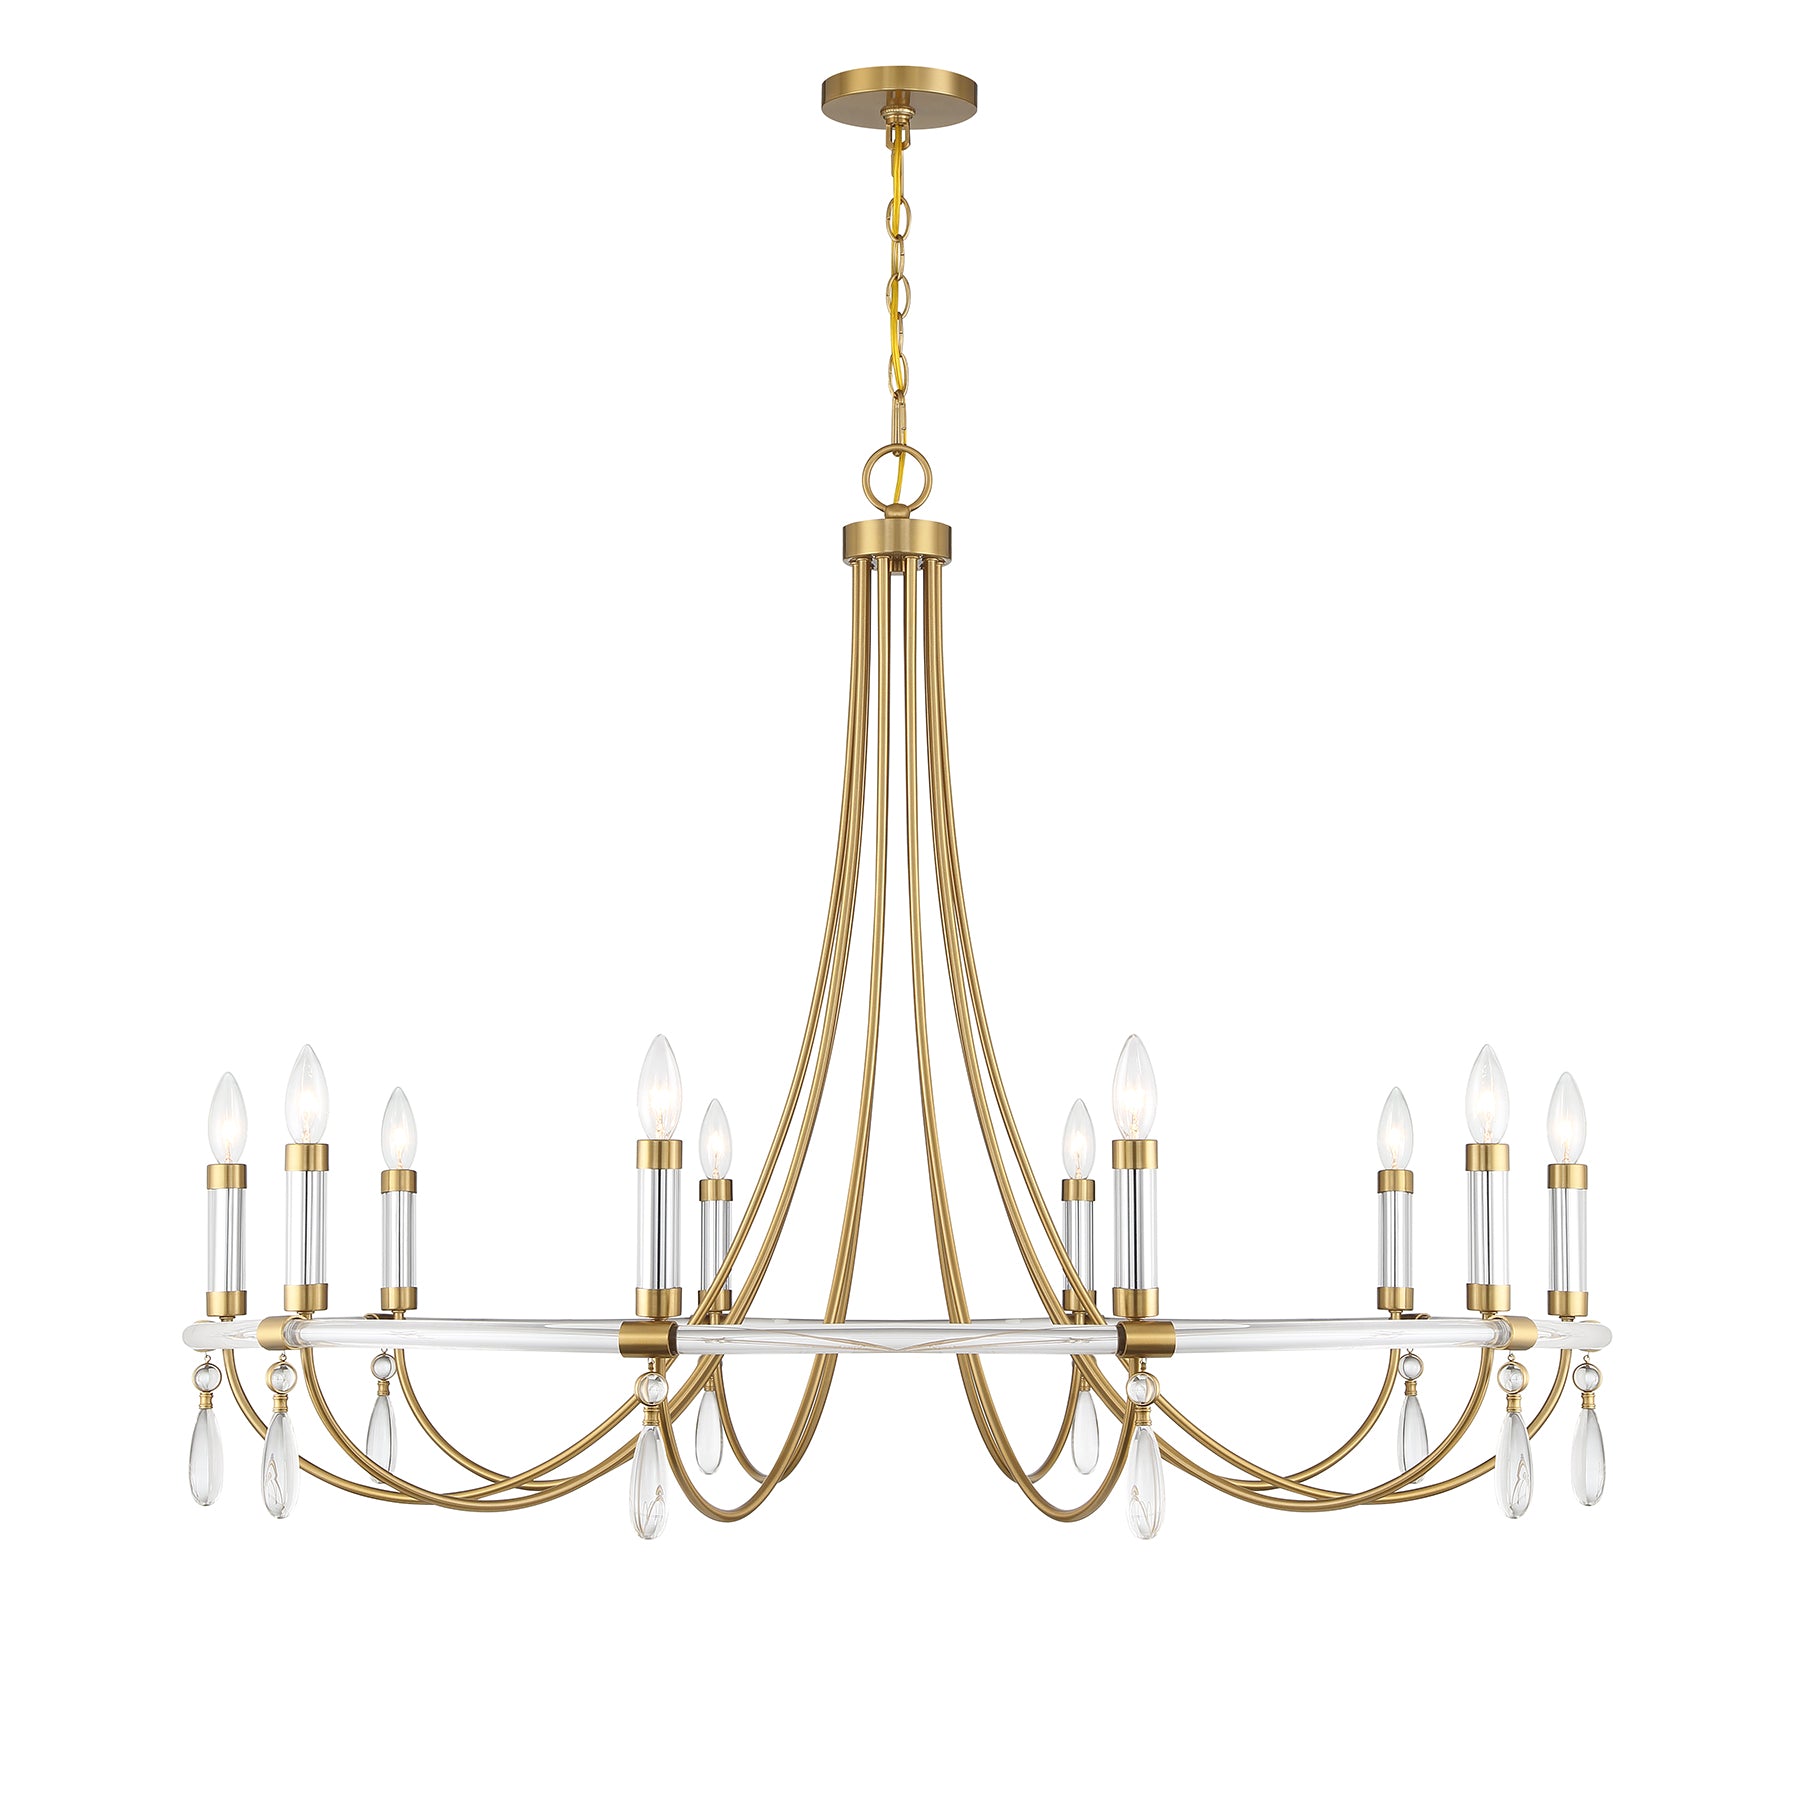 Mayfair 45 in. 10 Lights Chandelier Warm Brass and Chrome Finish